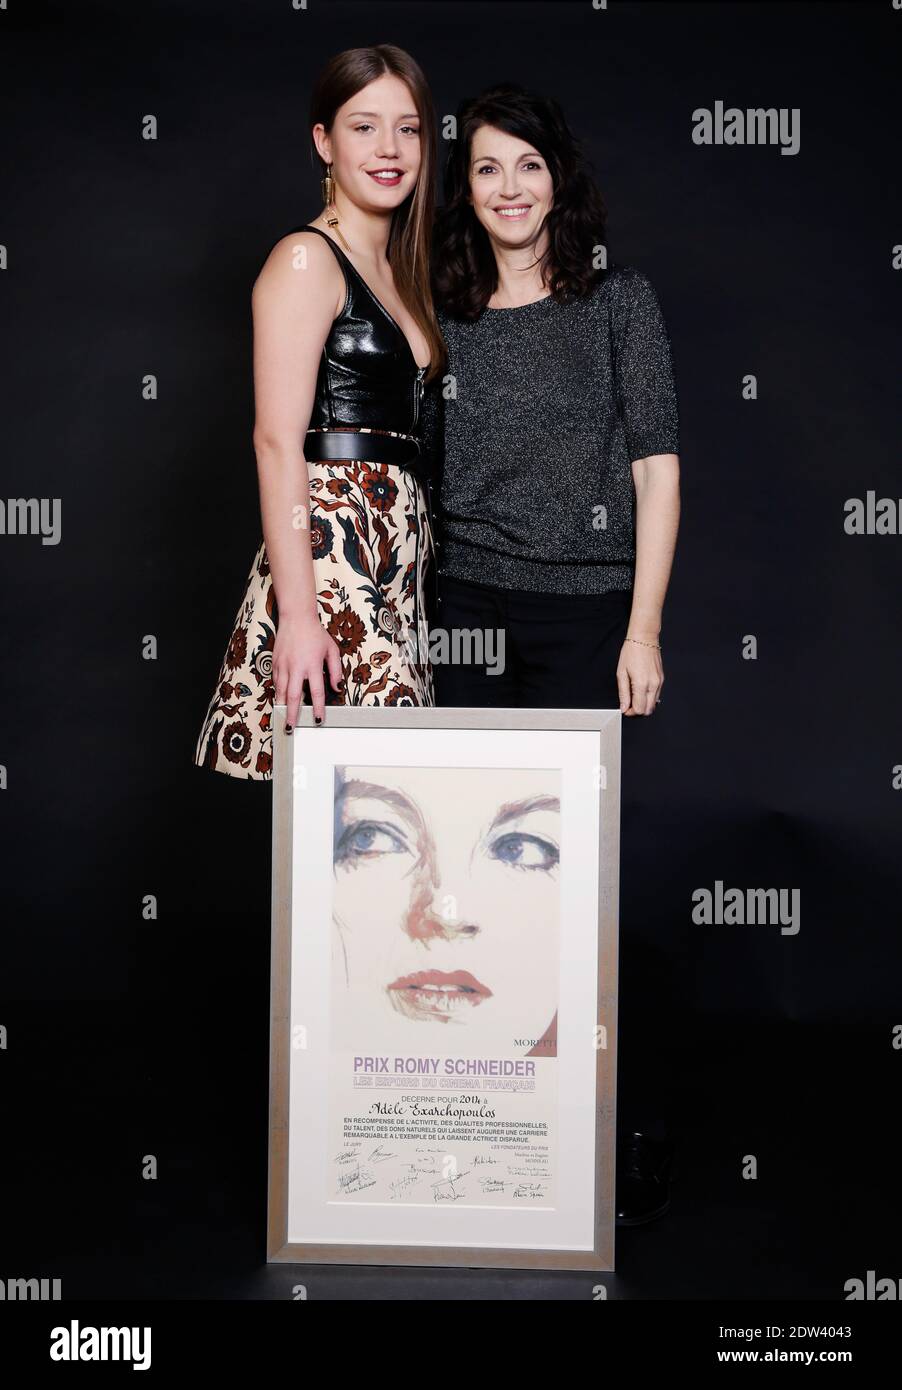 Exclusive - 2014 laureate Adele Exarchopoulos and Zabou Breitman posing during a photo shoot as part of the Prix Romy Schneider and Patrick Dewaere 2014 Awards held at Scribe Hotel in Paris, France on April 07, 2014. Photo by Jerome Domine/ABACAPRESS.COM Stock Photo